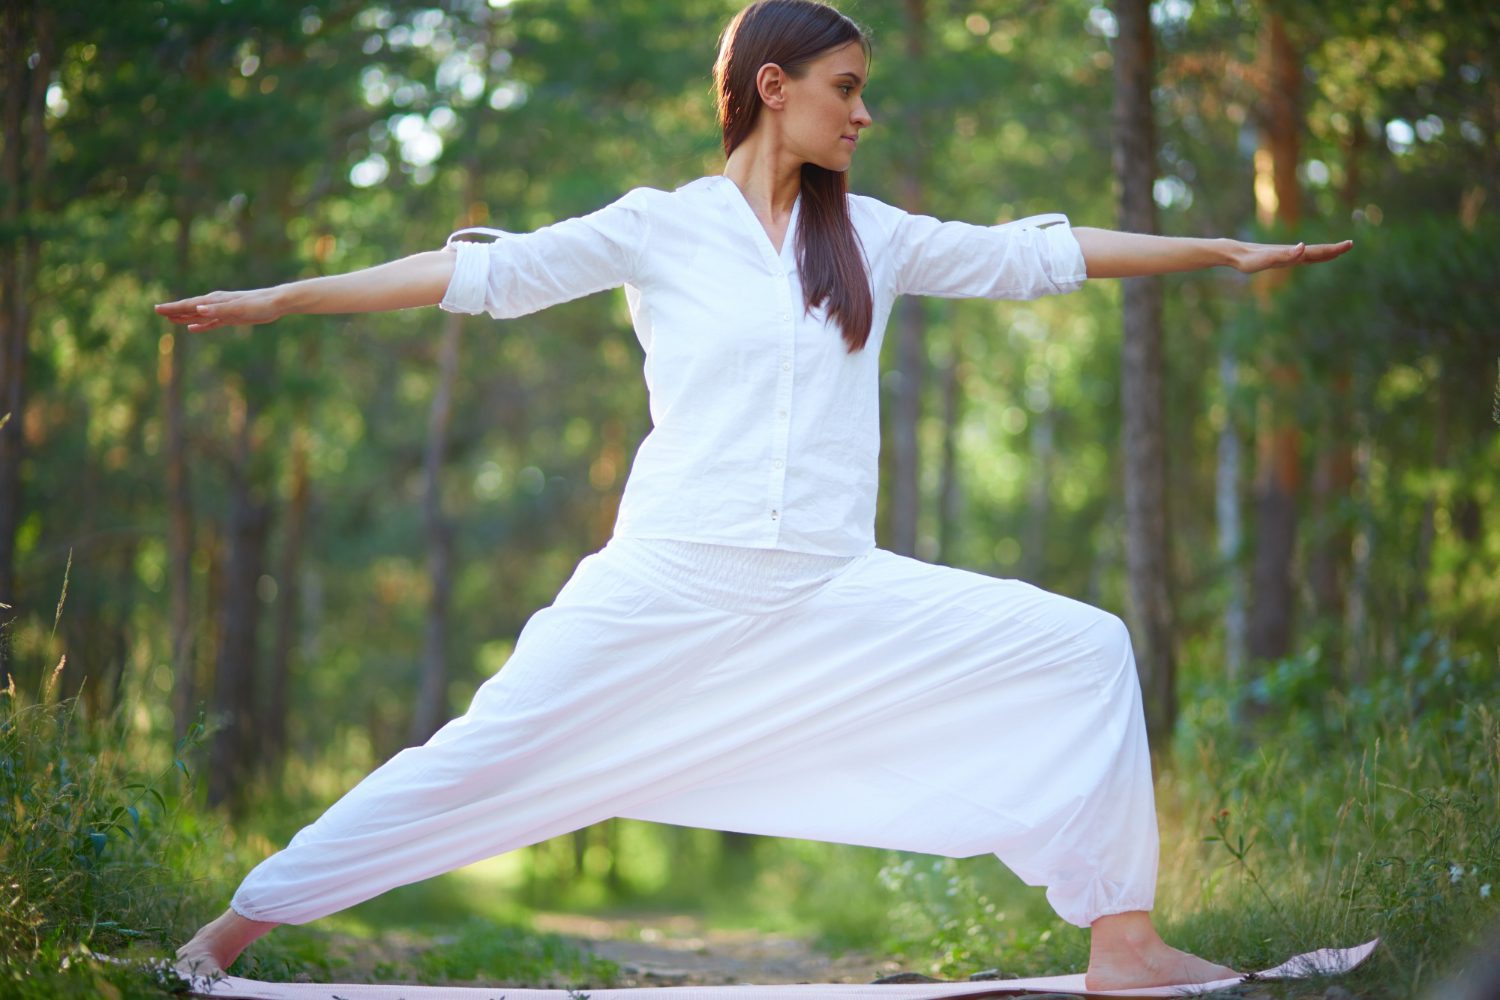 Is Doing Tai-Chi for 5 Minutes a Day Effective